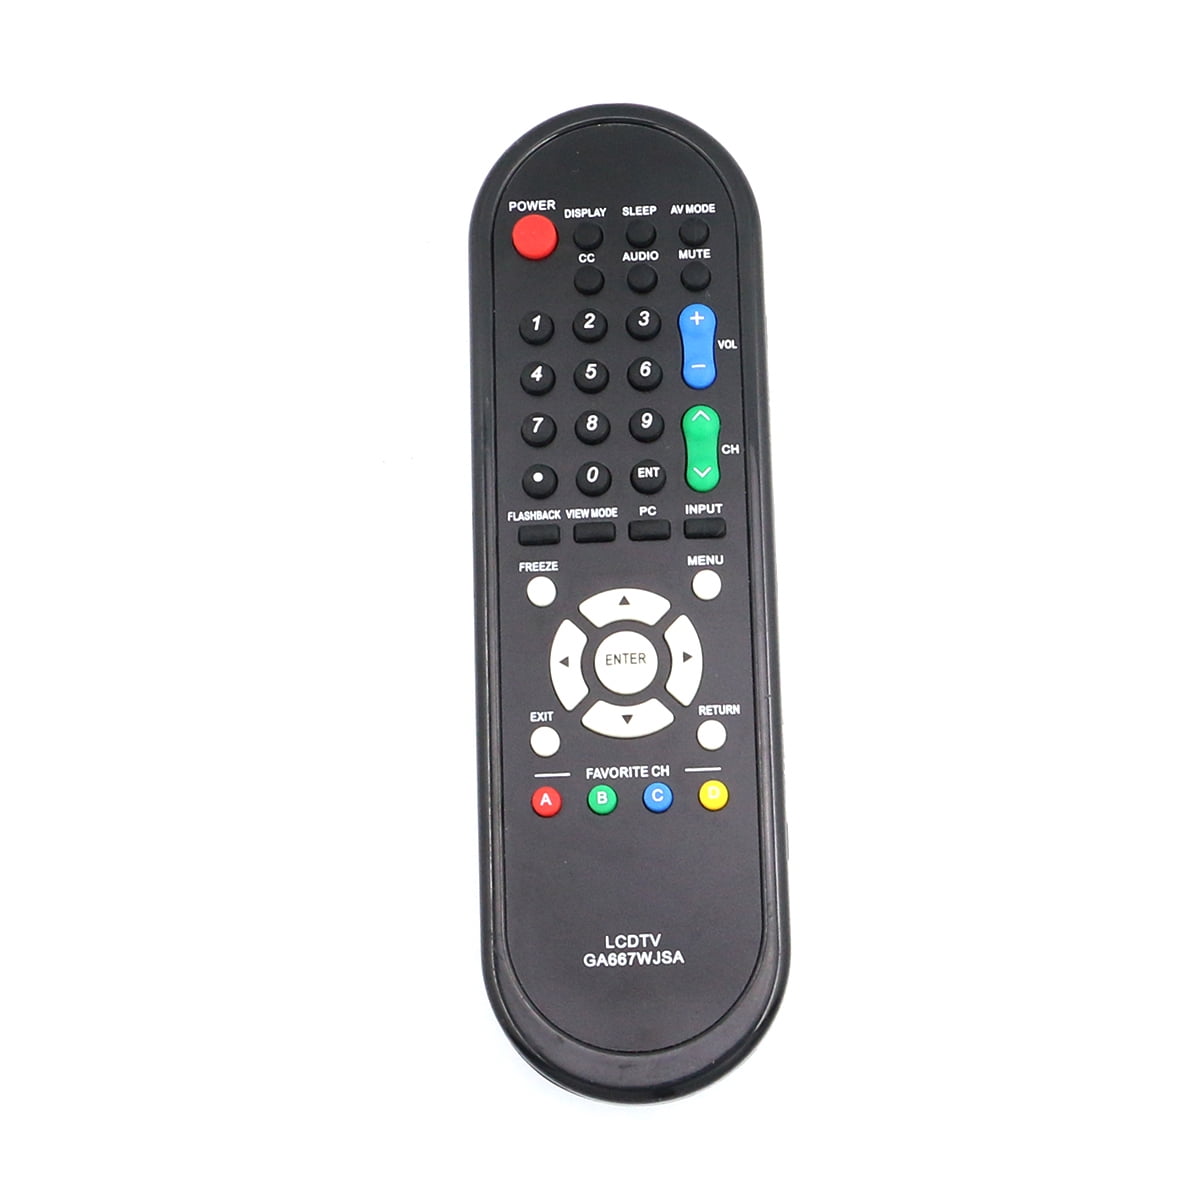 UNIVERSAL REMOTE CONTROL REPLACEMENT FOR Sharp GA472WJSA LCD LED TV Netflix